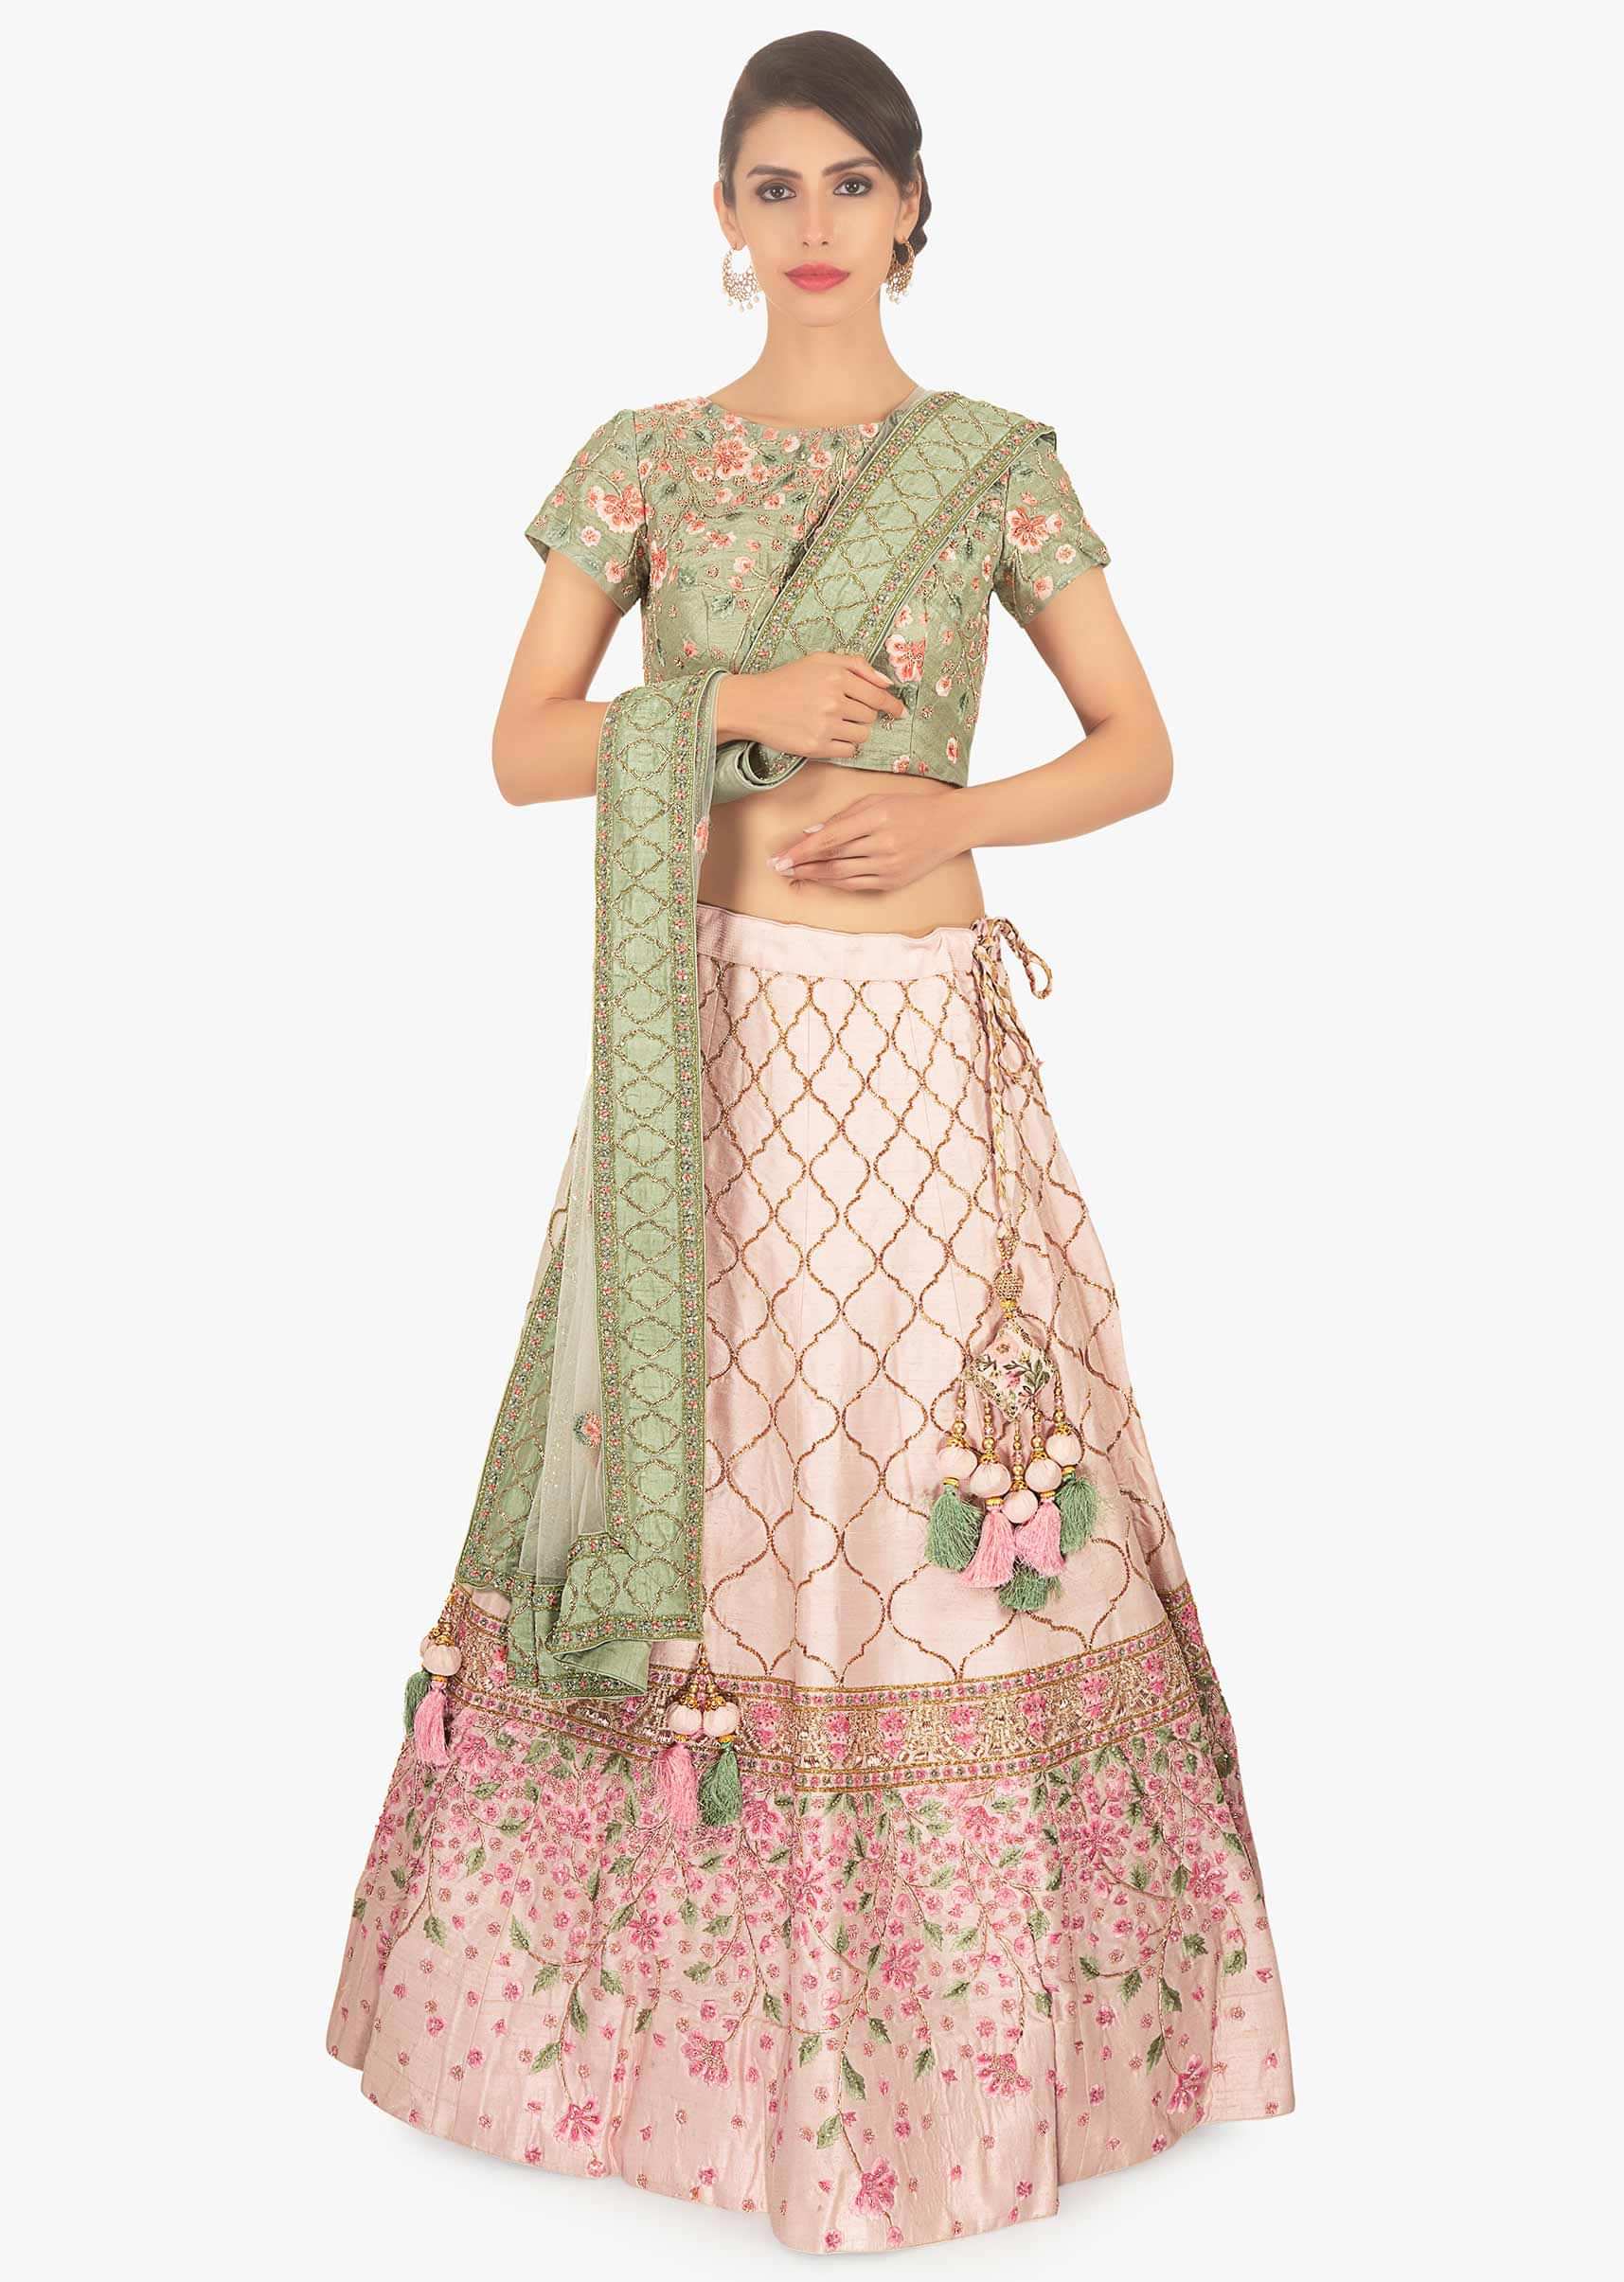 Sage green floral embroidered blouse paired with creamish pink lehenga and off white net dupatta